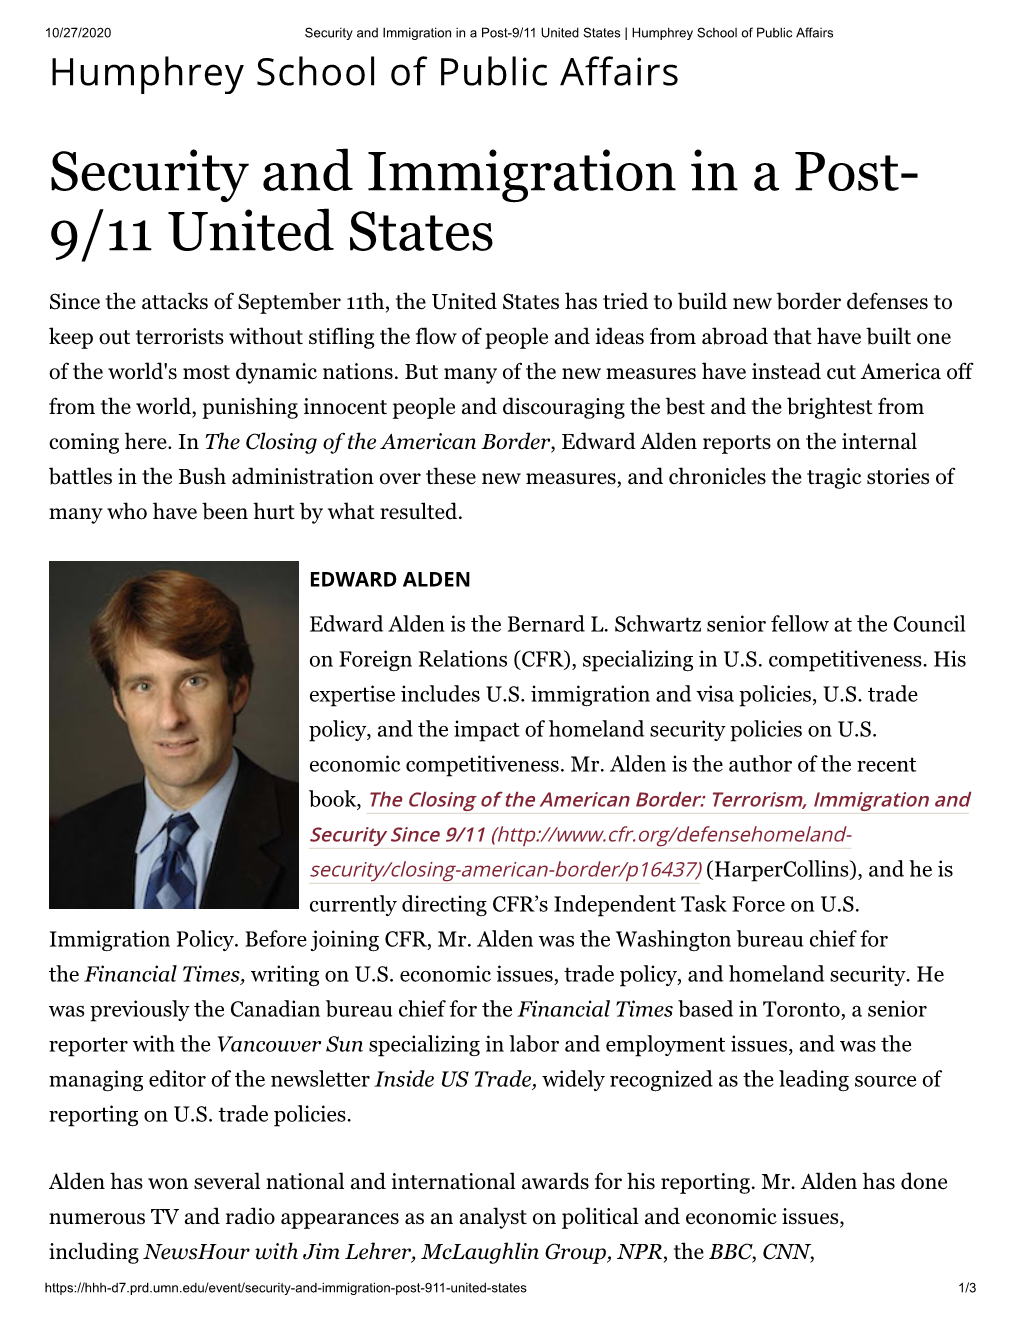 Security and Immigration in a Post